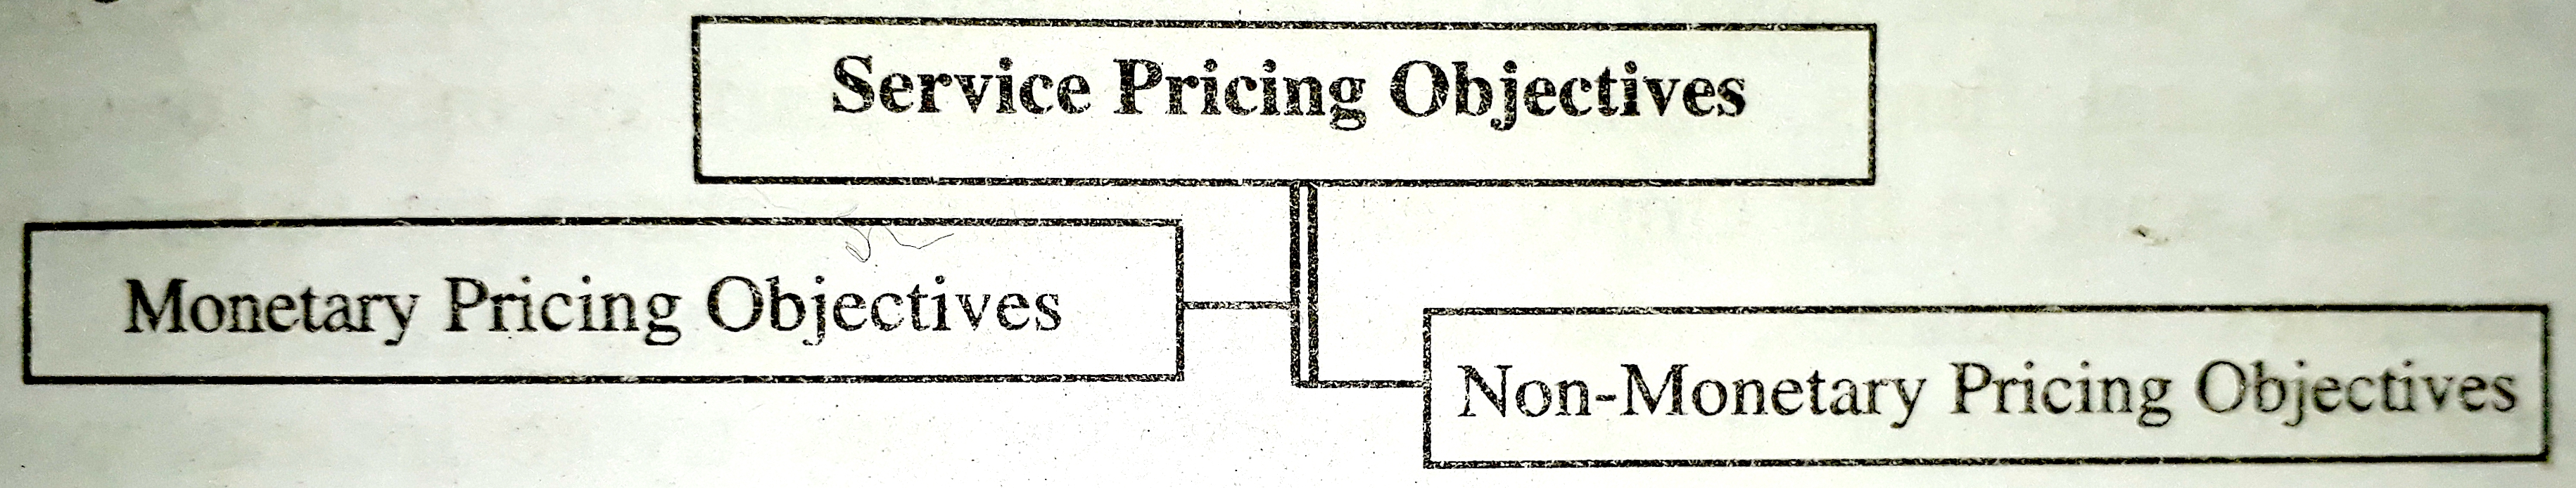 Service Pricing Objectives